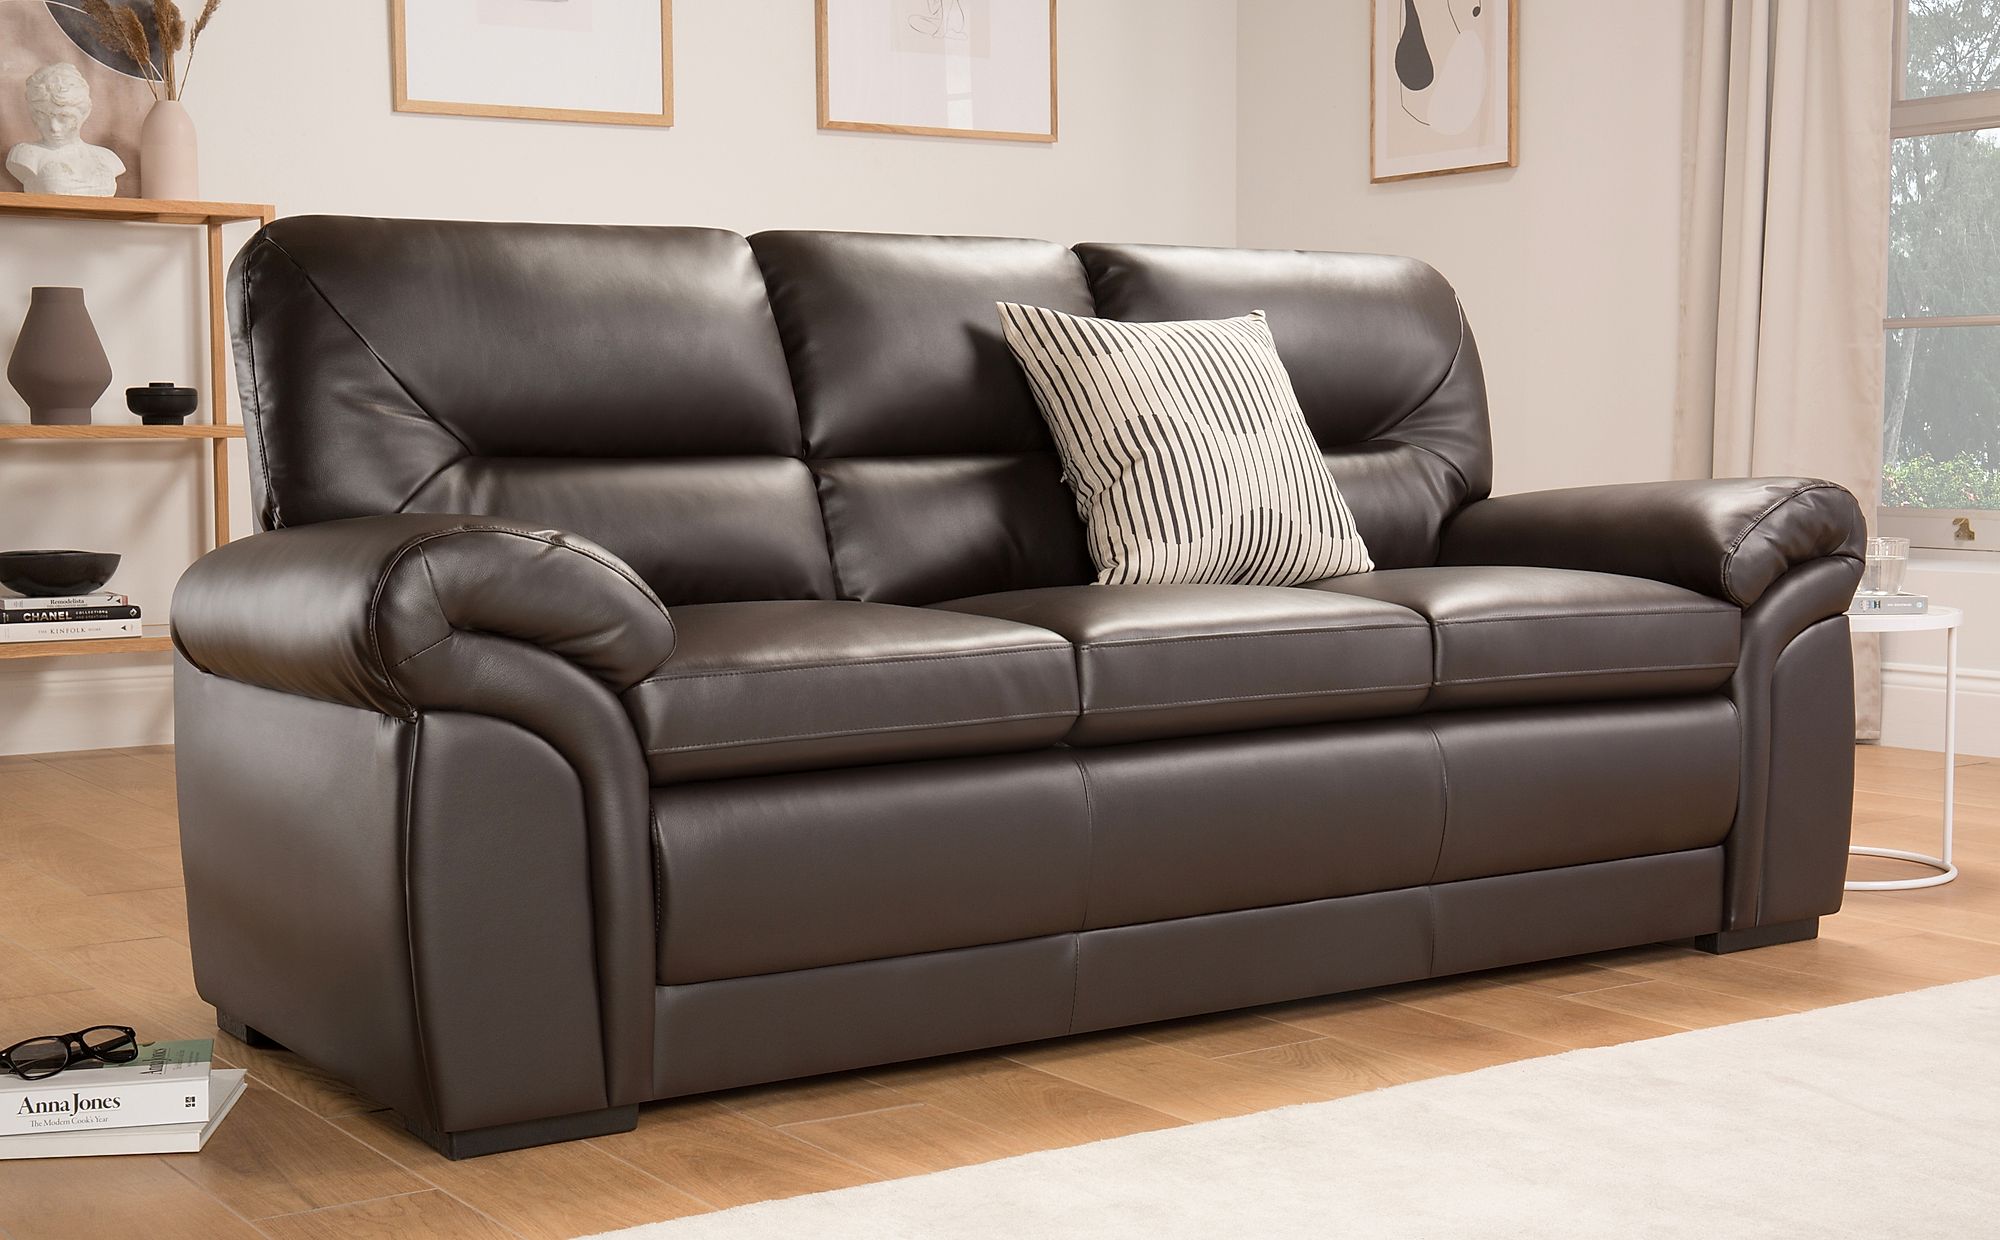 firm leather sofa grey